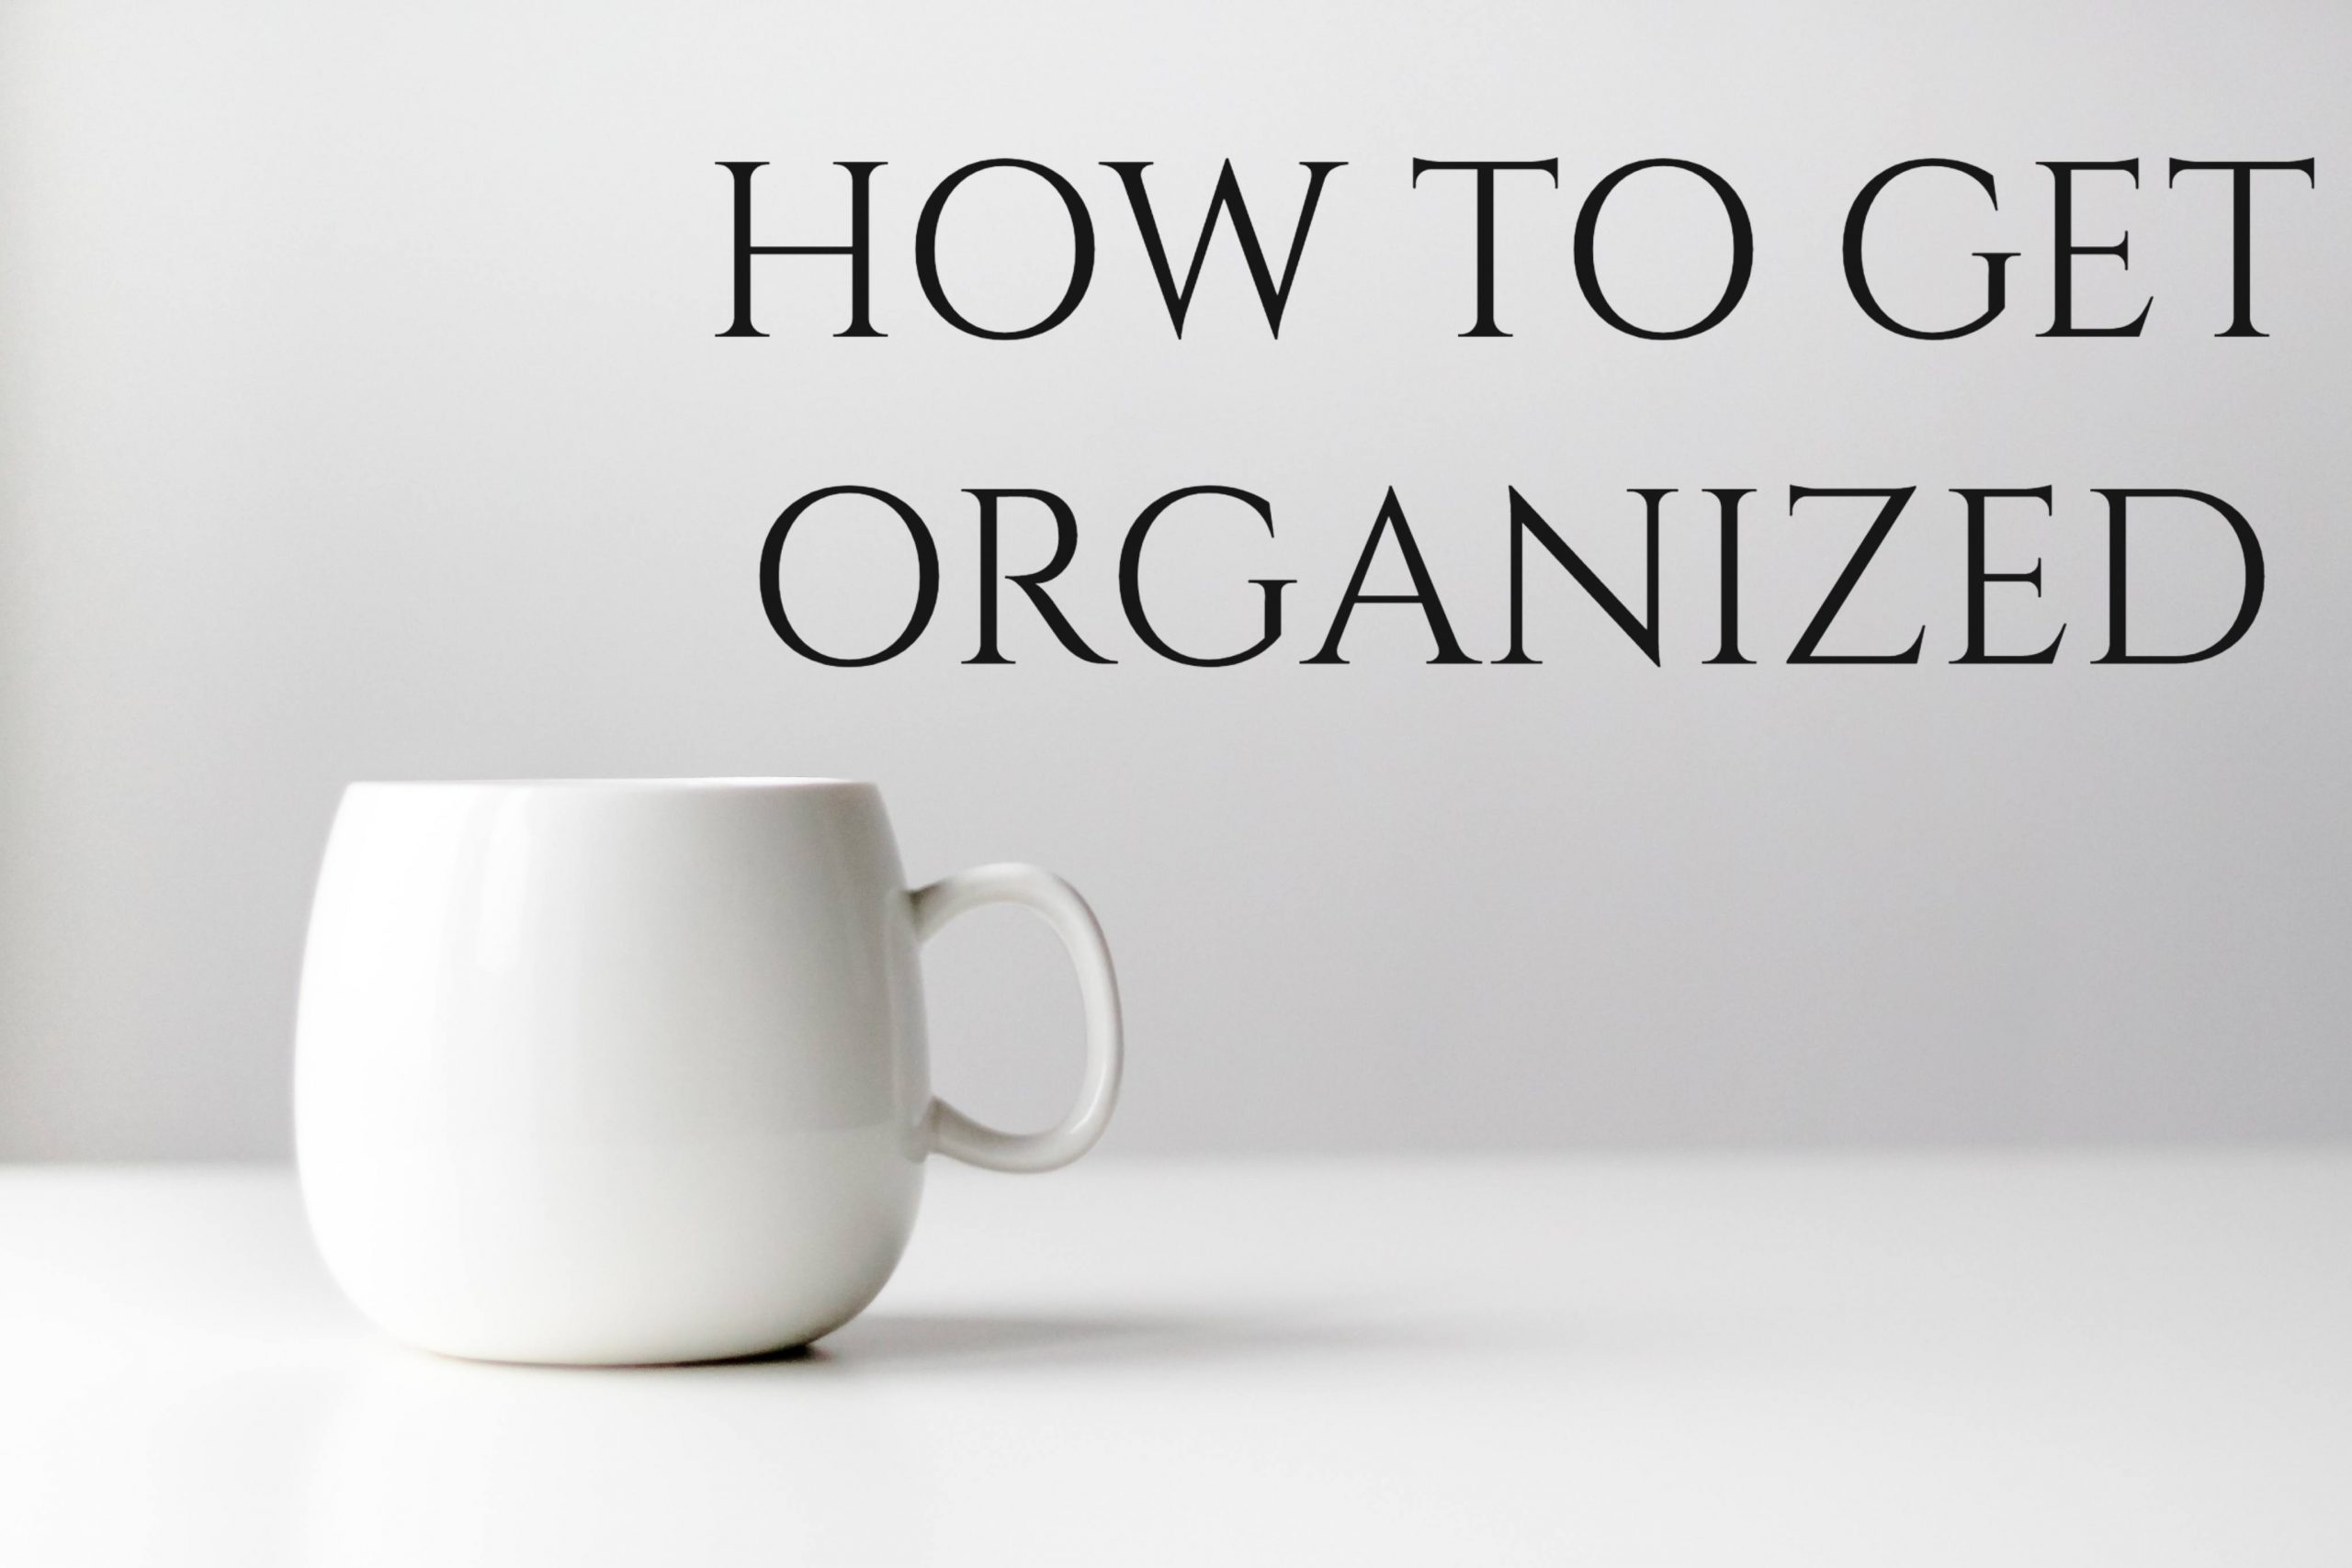 How To Get Organized and Be Stress-Free